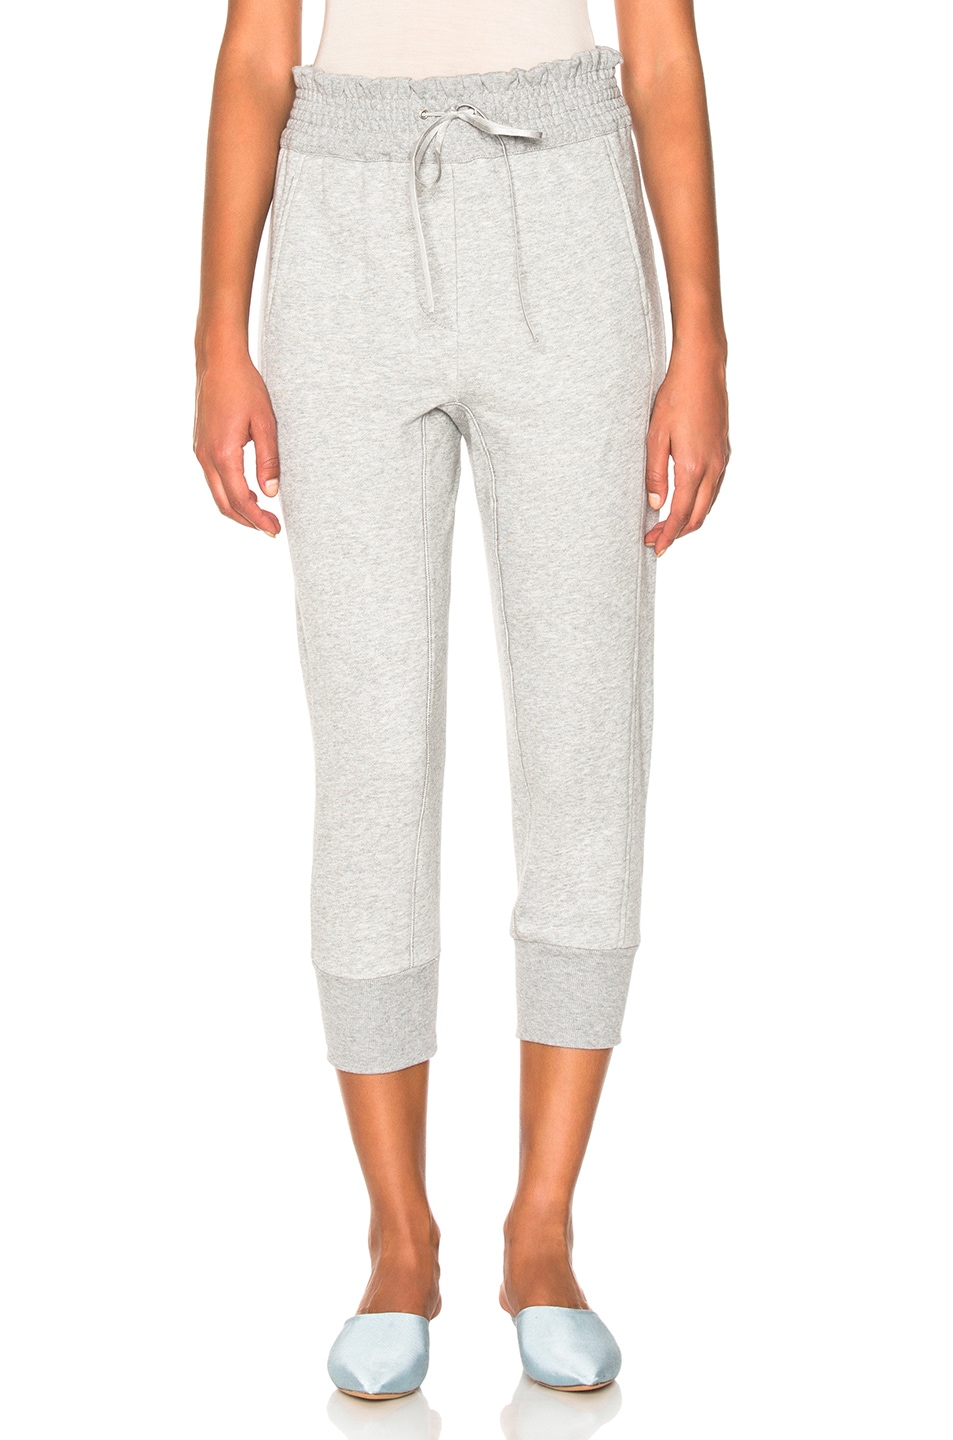 Image 1 of 3.1 phillip lim French Terry Jogger Pants in Light Grey Melange